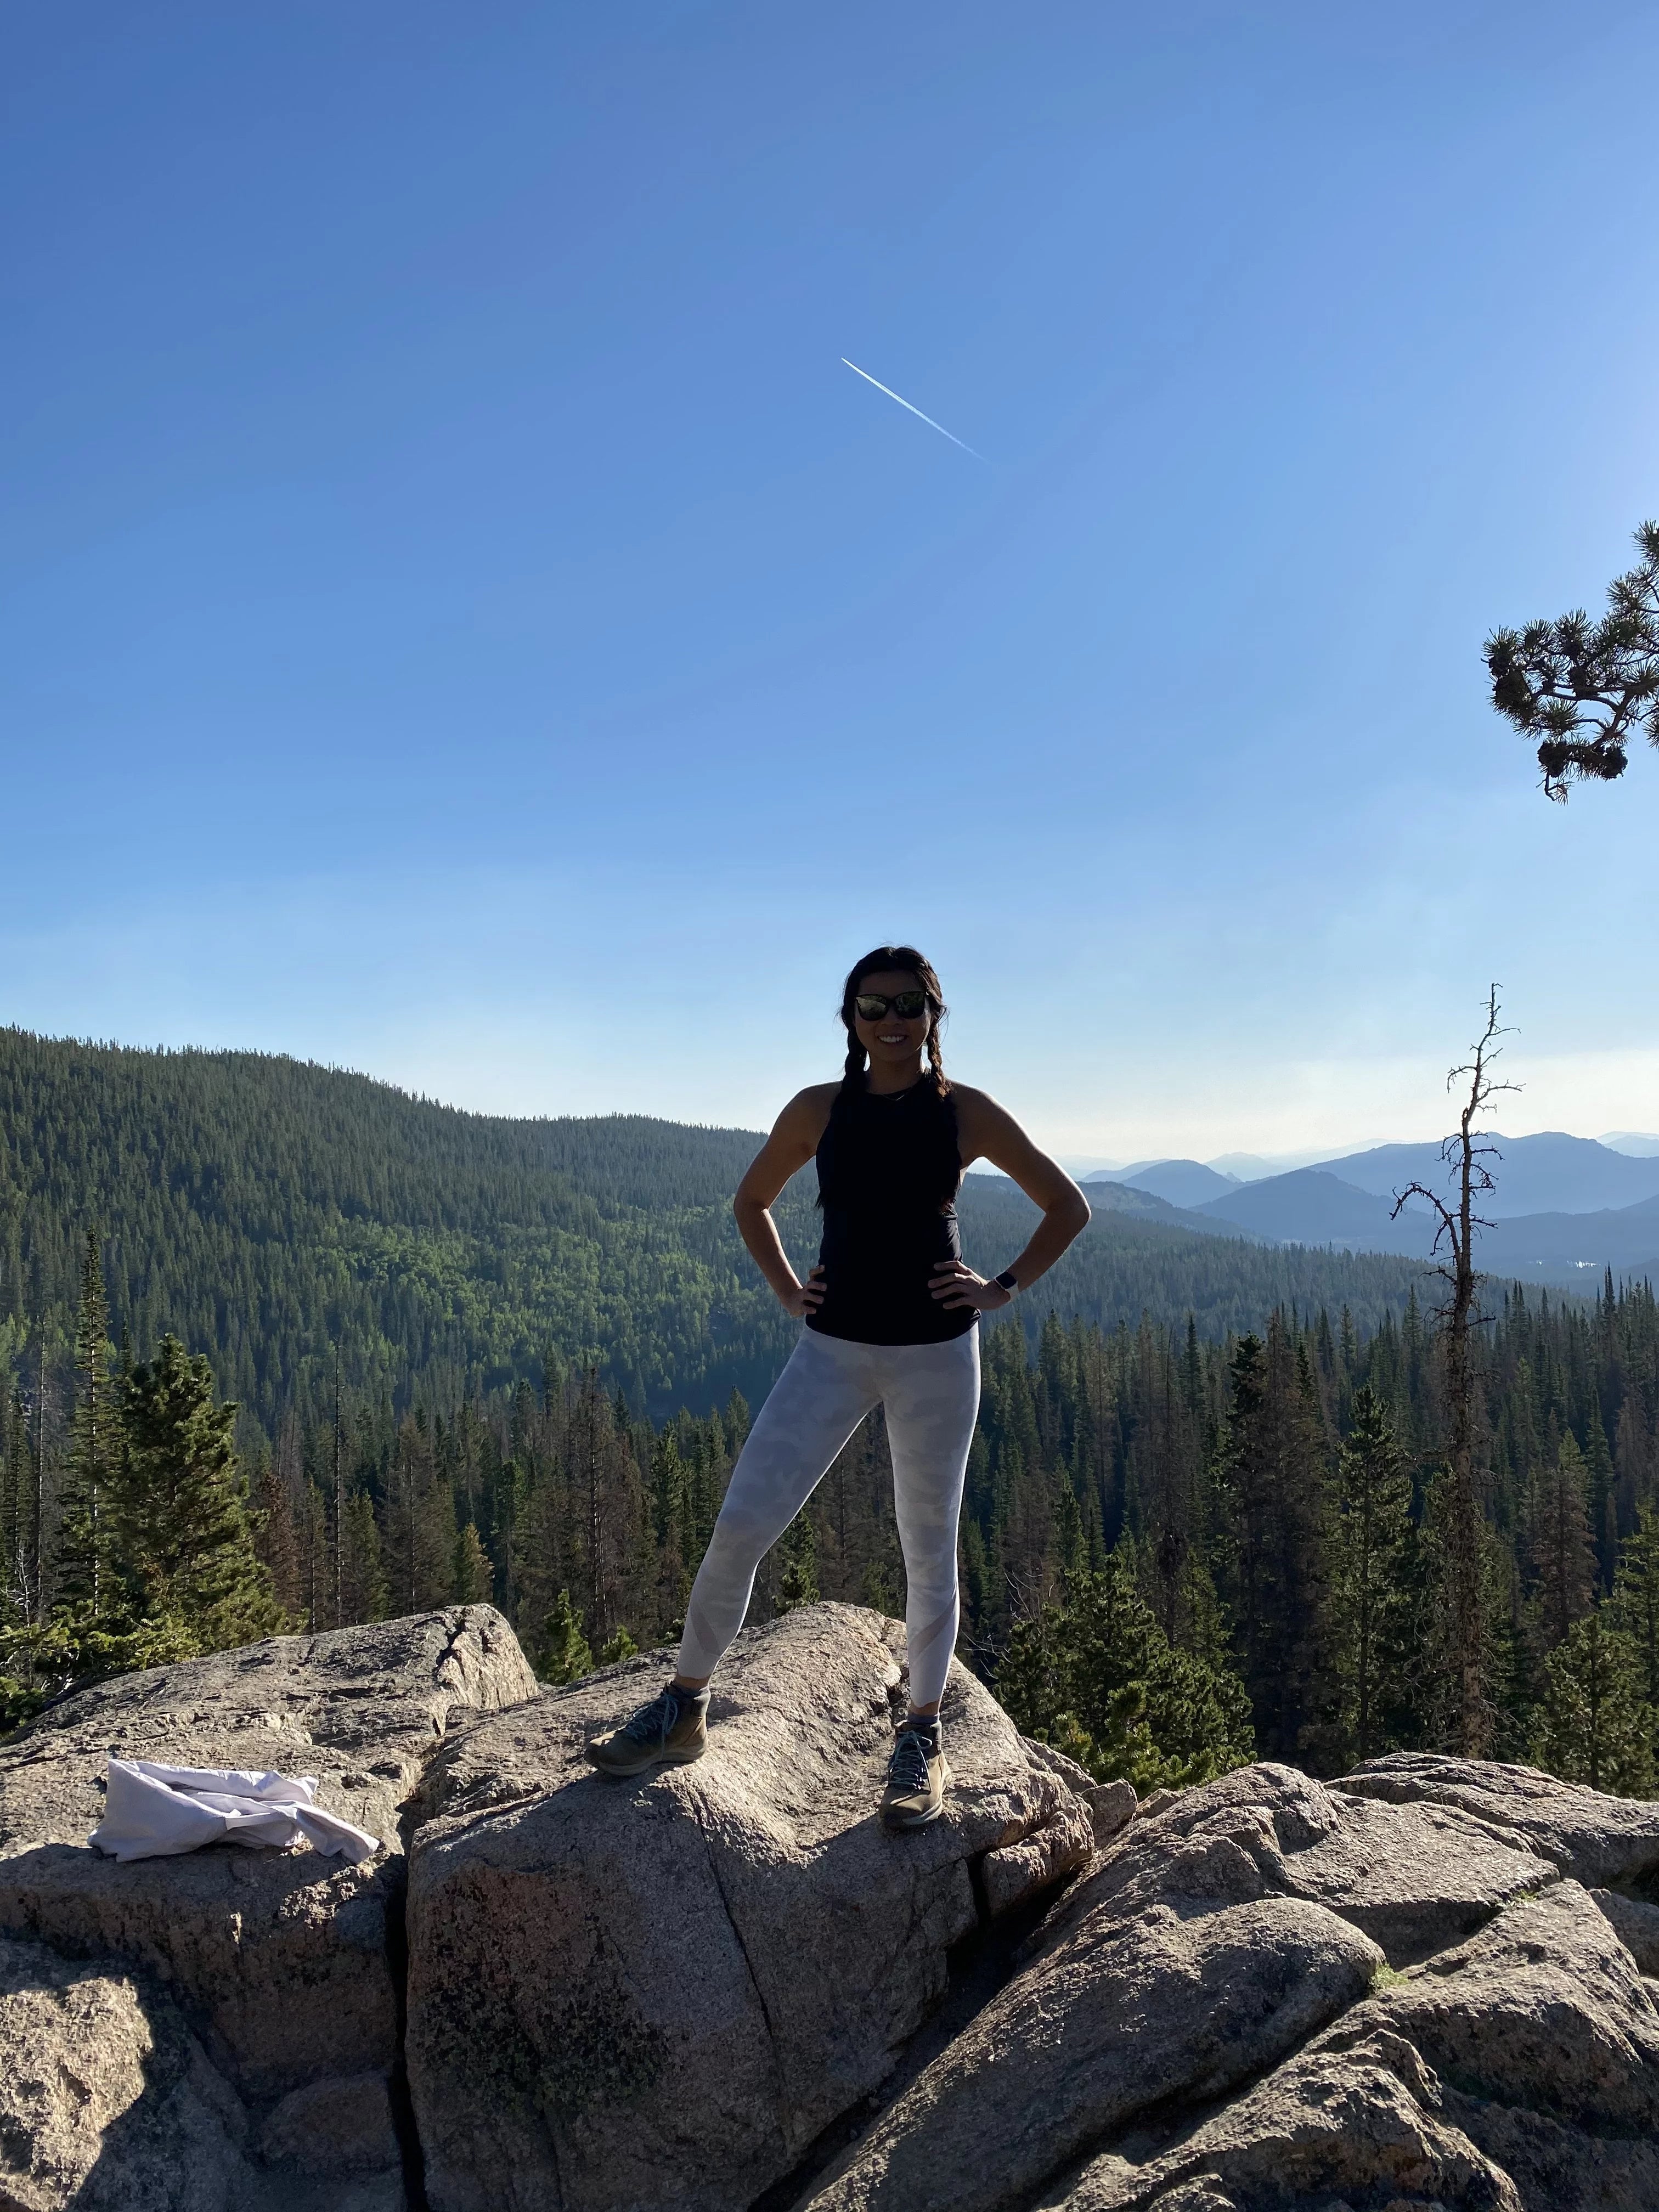 hiking in colorado and conquering the world